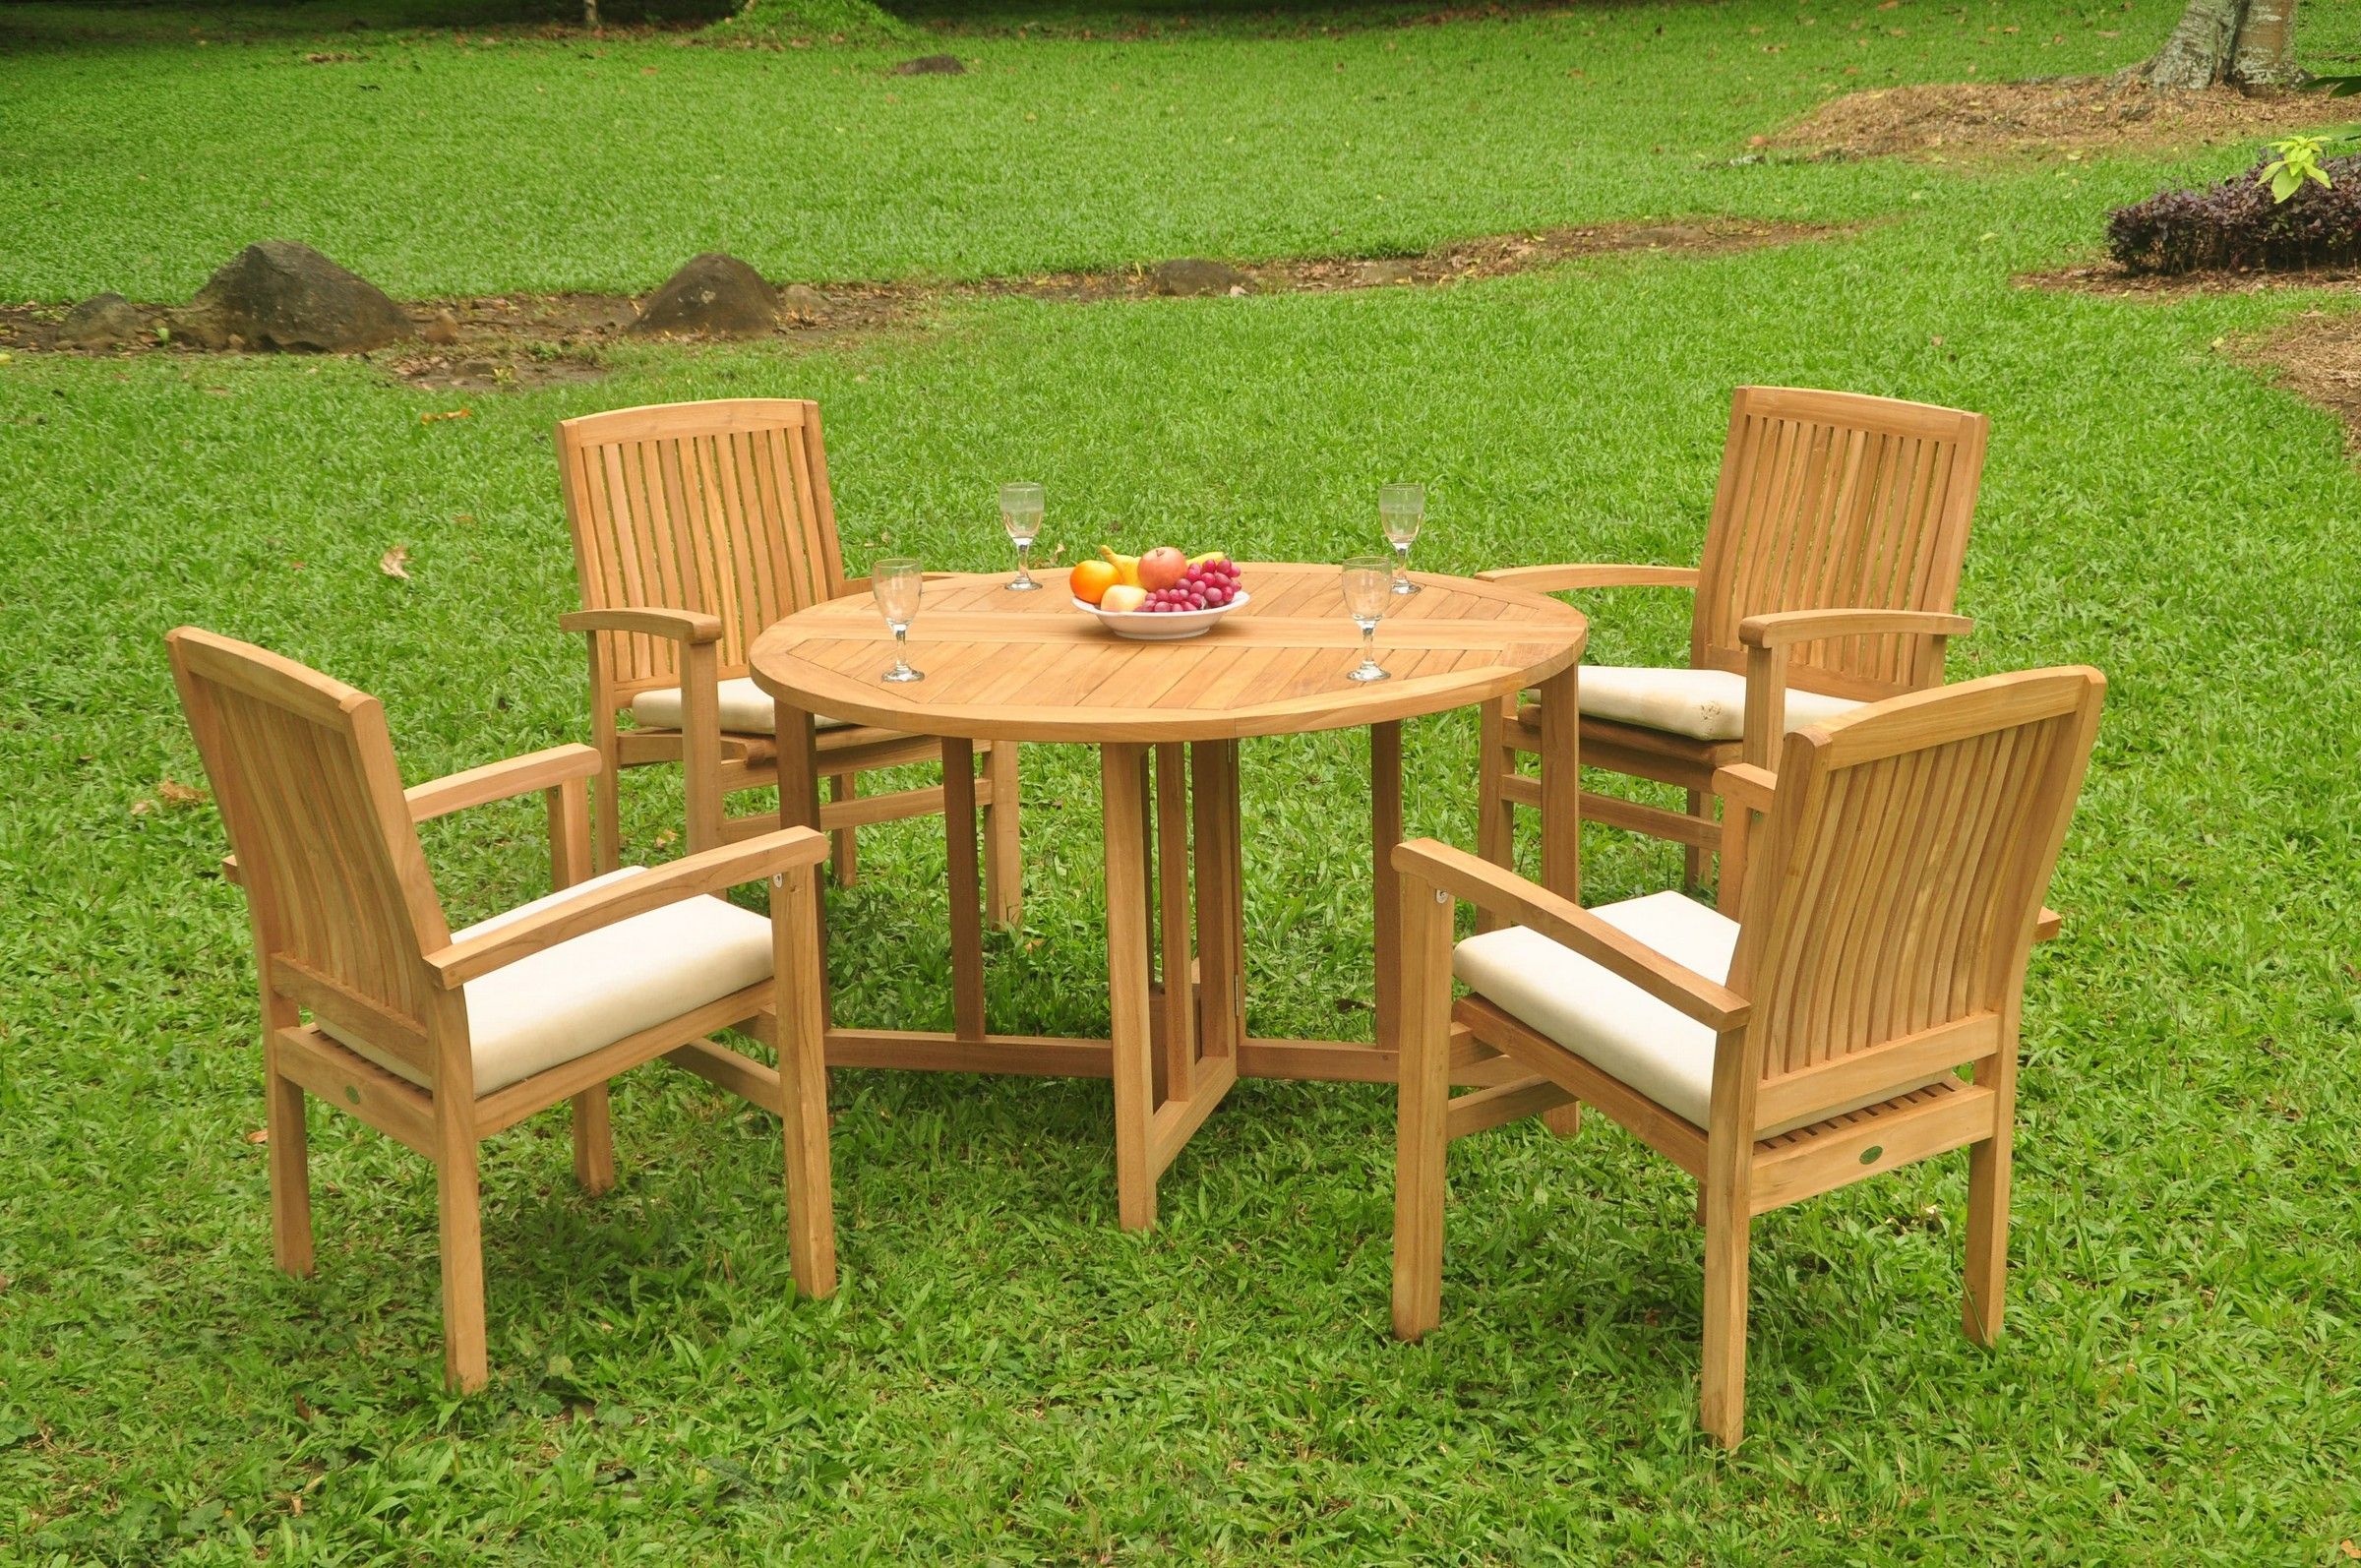 Grade A Teak Dining Set: 4 Seater 5 Pc: 48" Round Butterfly Table And 4 Inside Teak Armchair Round Patio Dining Sets (View 3 of 15)